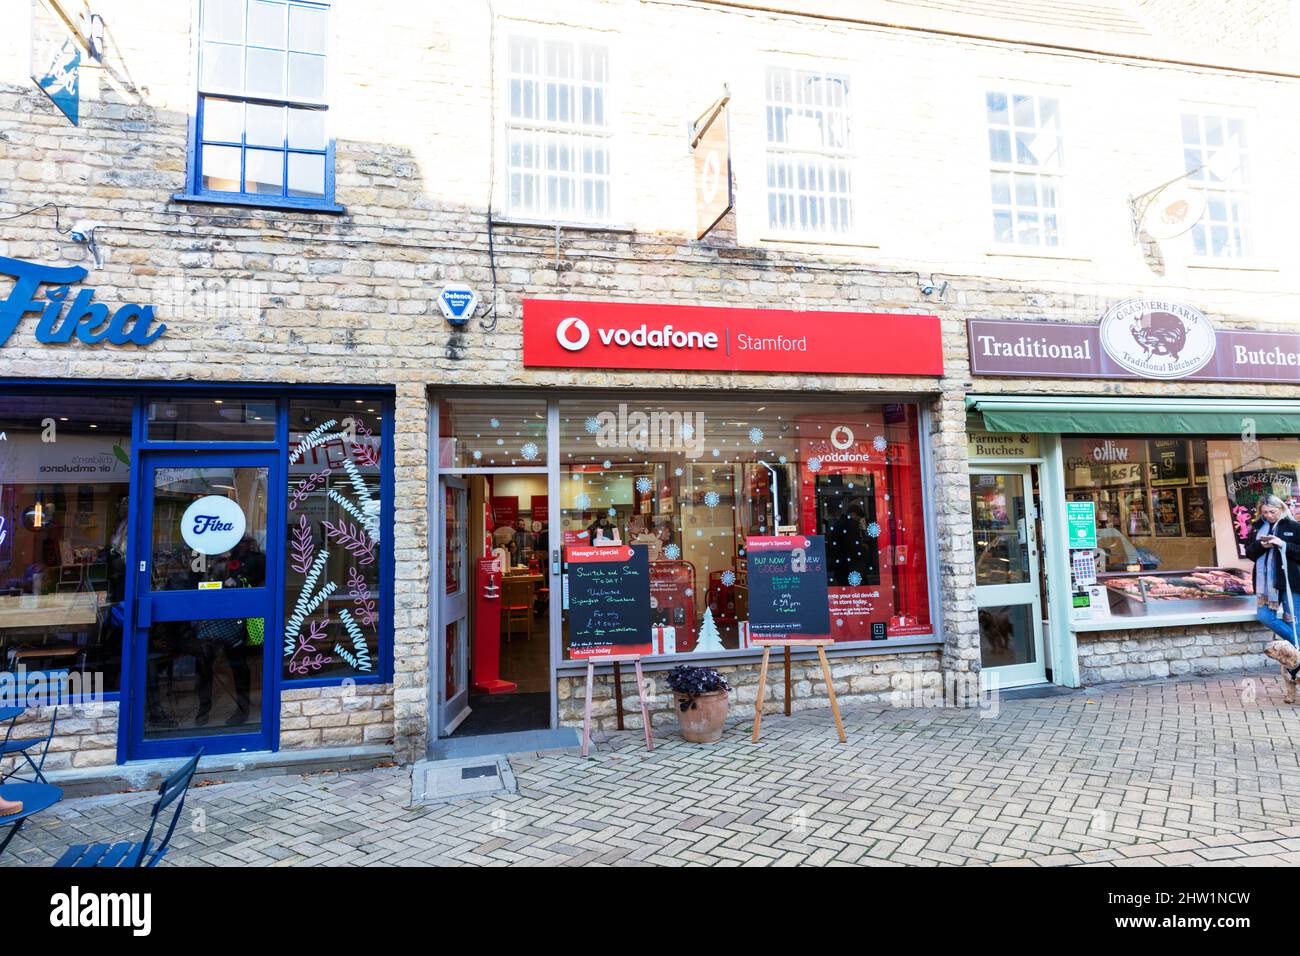 Vodaphone shop, Vodaphone store,Vodaphone sign,Stamford, Lincolnshire, UK, England, Stamford town, Stamford UK, Stamford Lincolnshire, Stock Photo